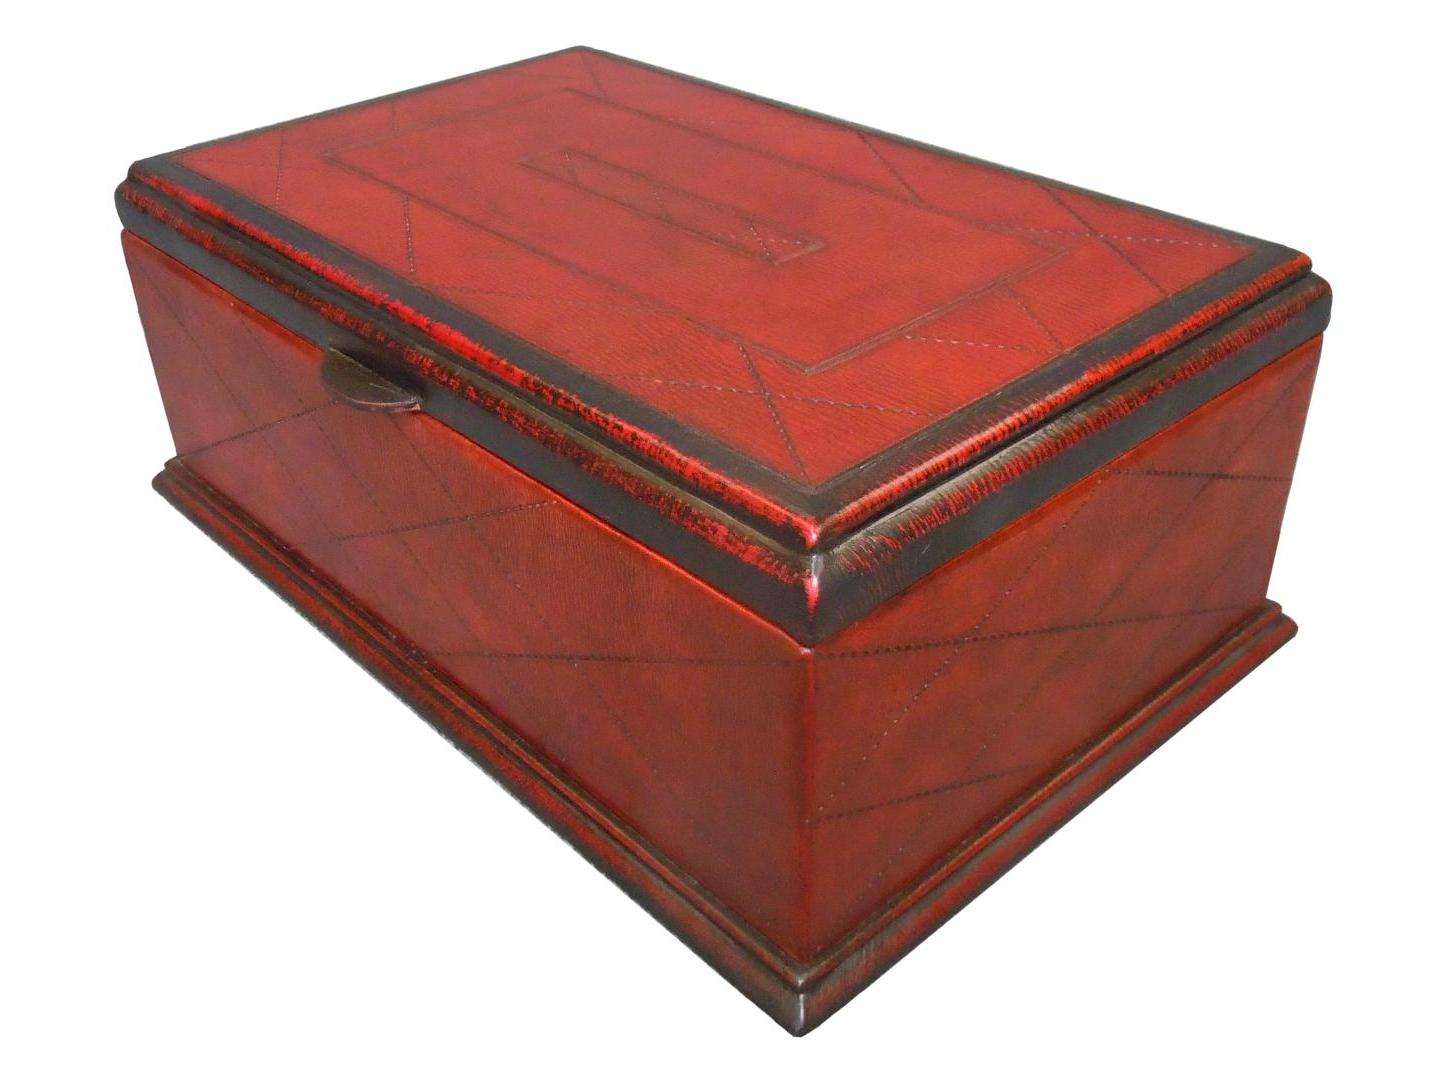 leather box with a sewing design on the top